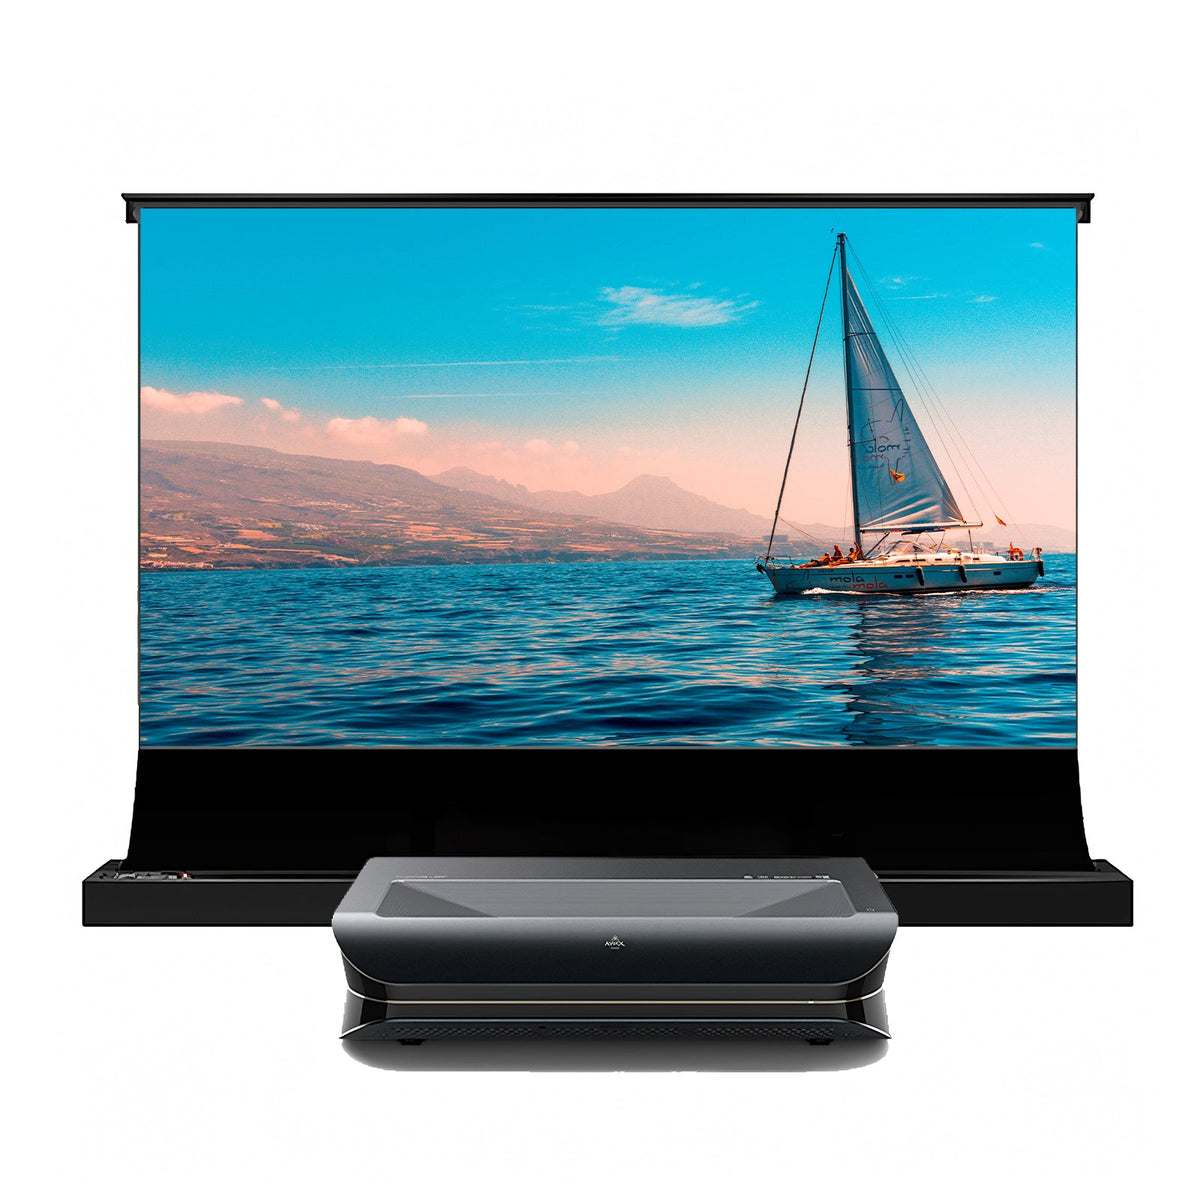 AWOL Vision LTV-3500 Pro projector and Cinematic+ screen bundle showcasing a sailboat on the ocean.